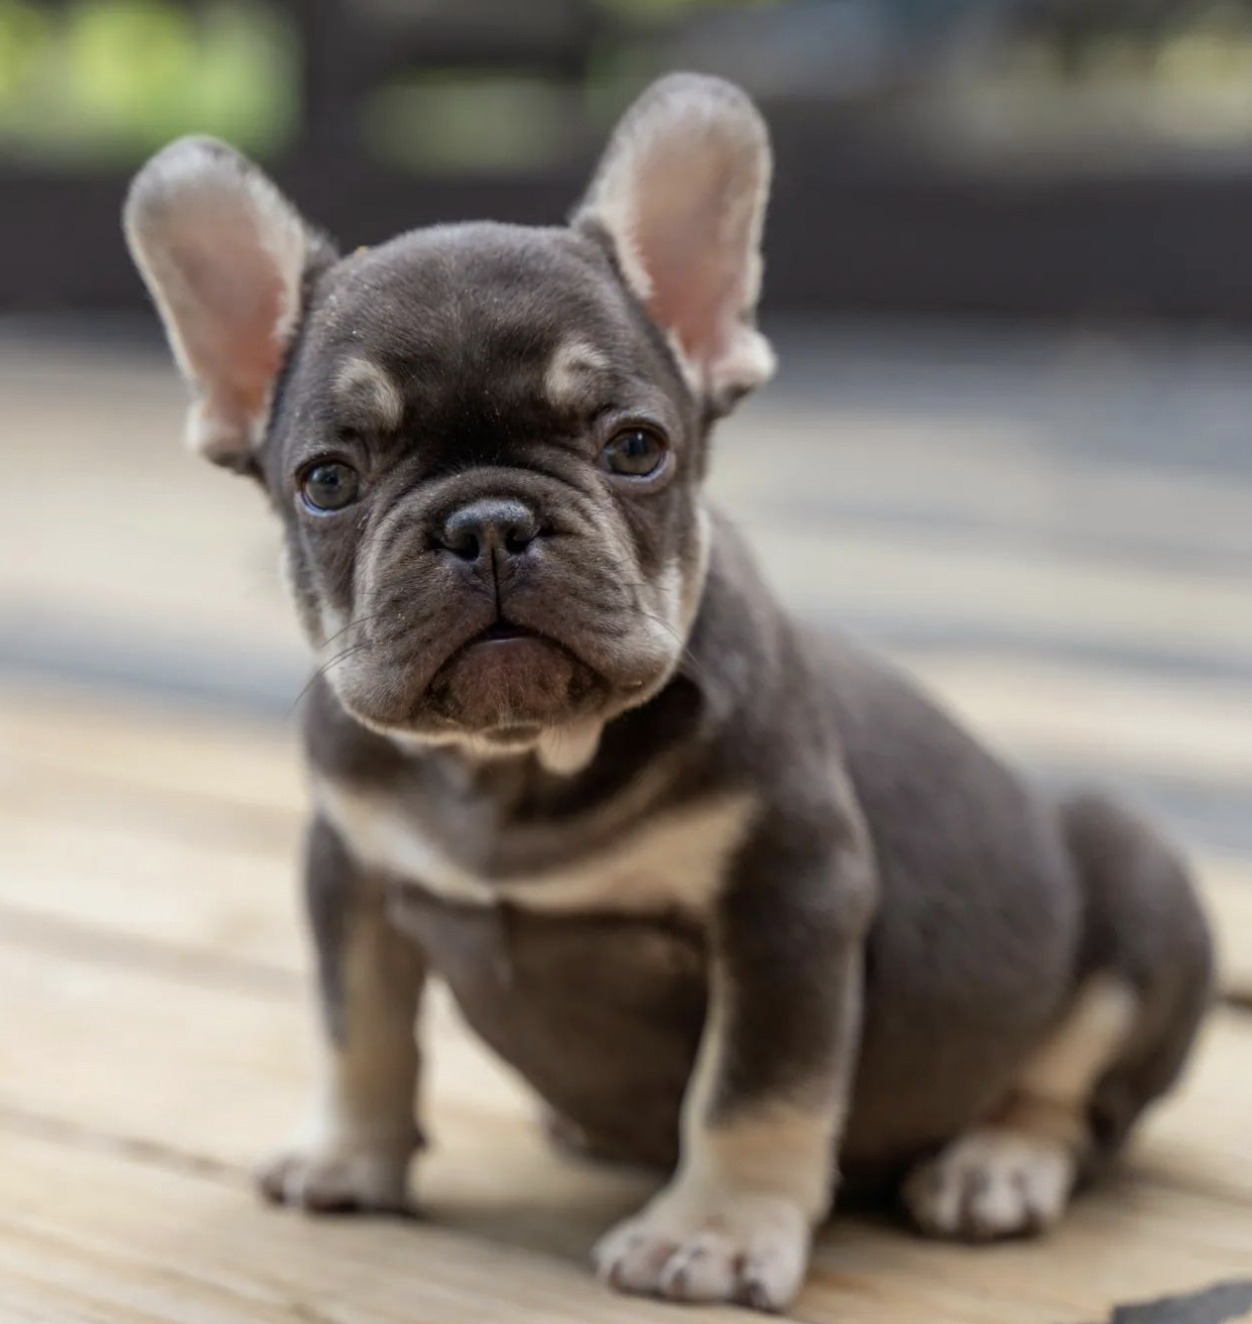 Teacup French Bulldog - The Truth About This Mini Breed.